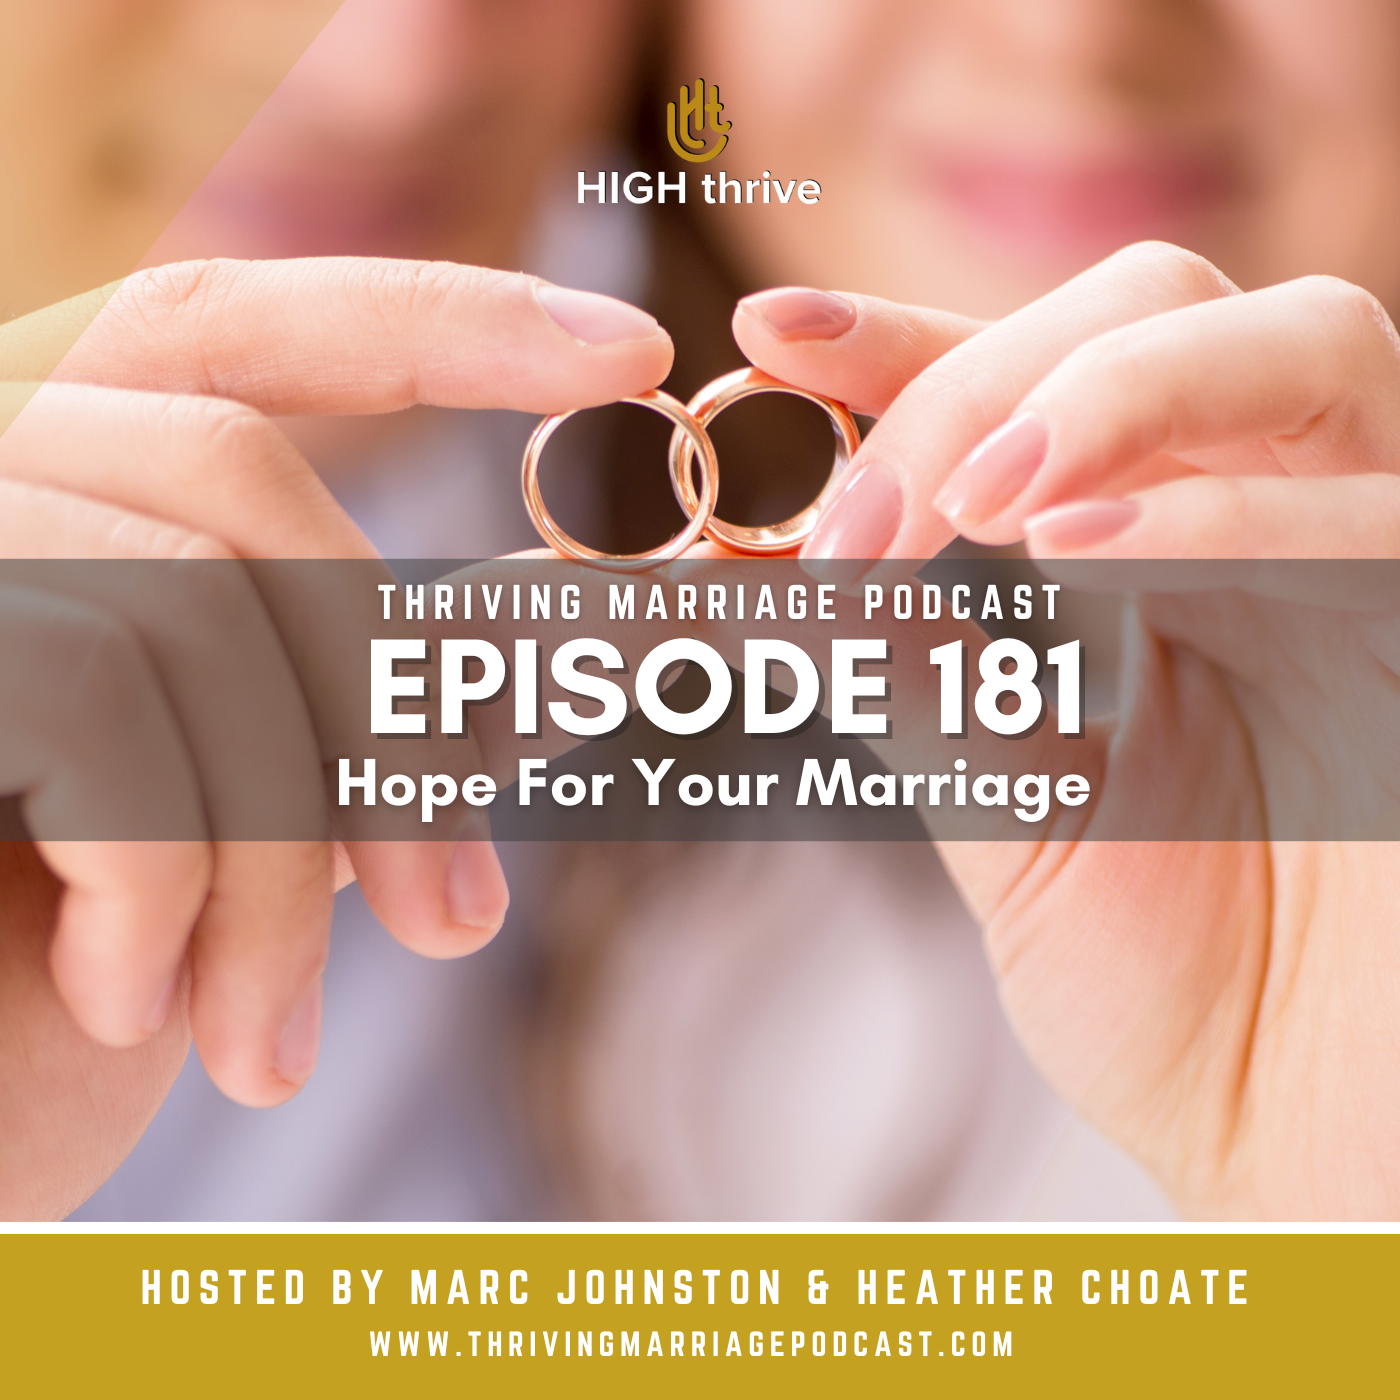 Episode 181: Hope For Your Marriage